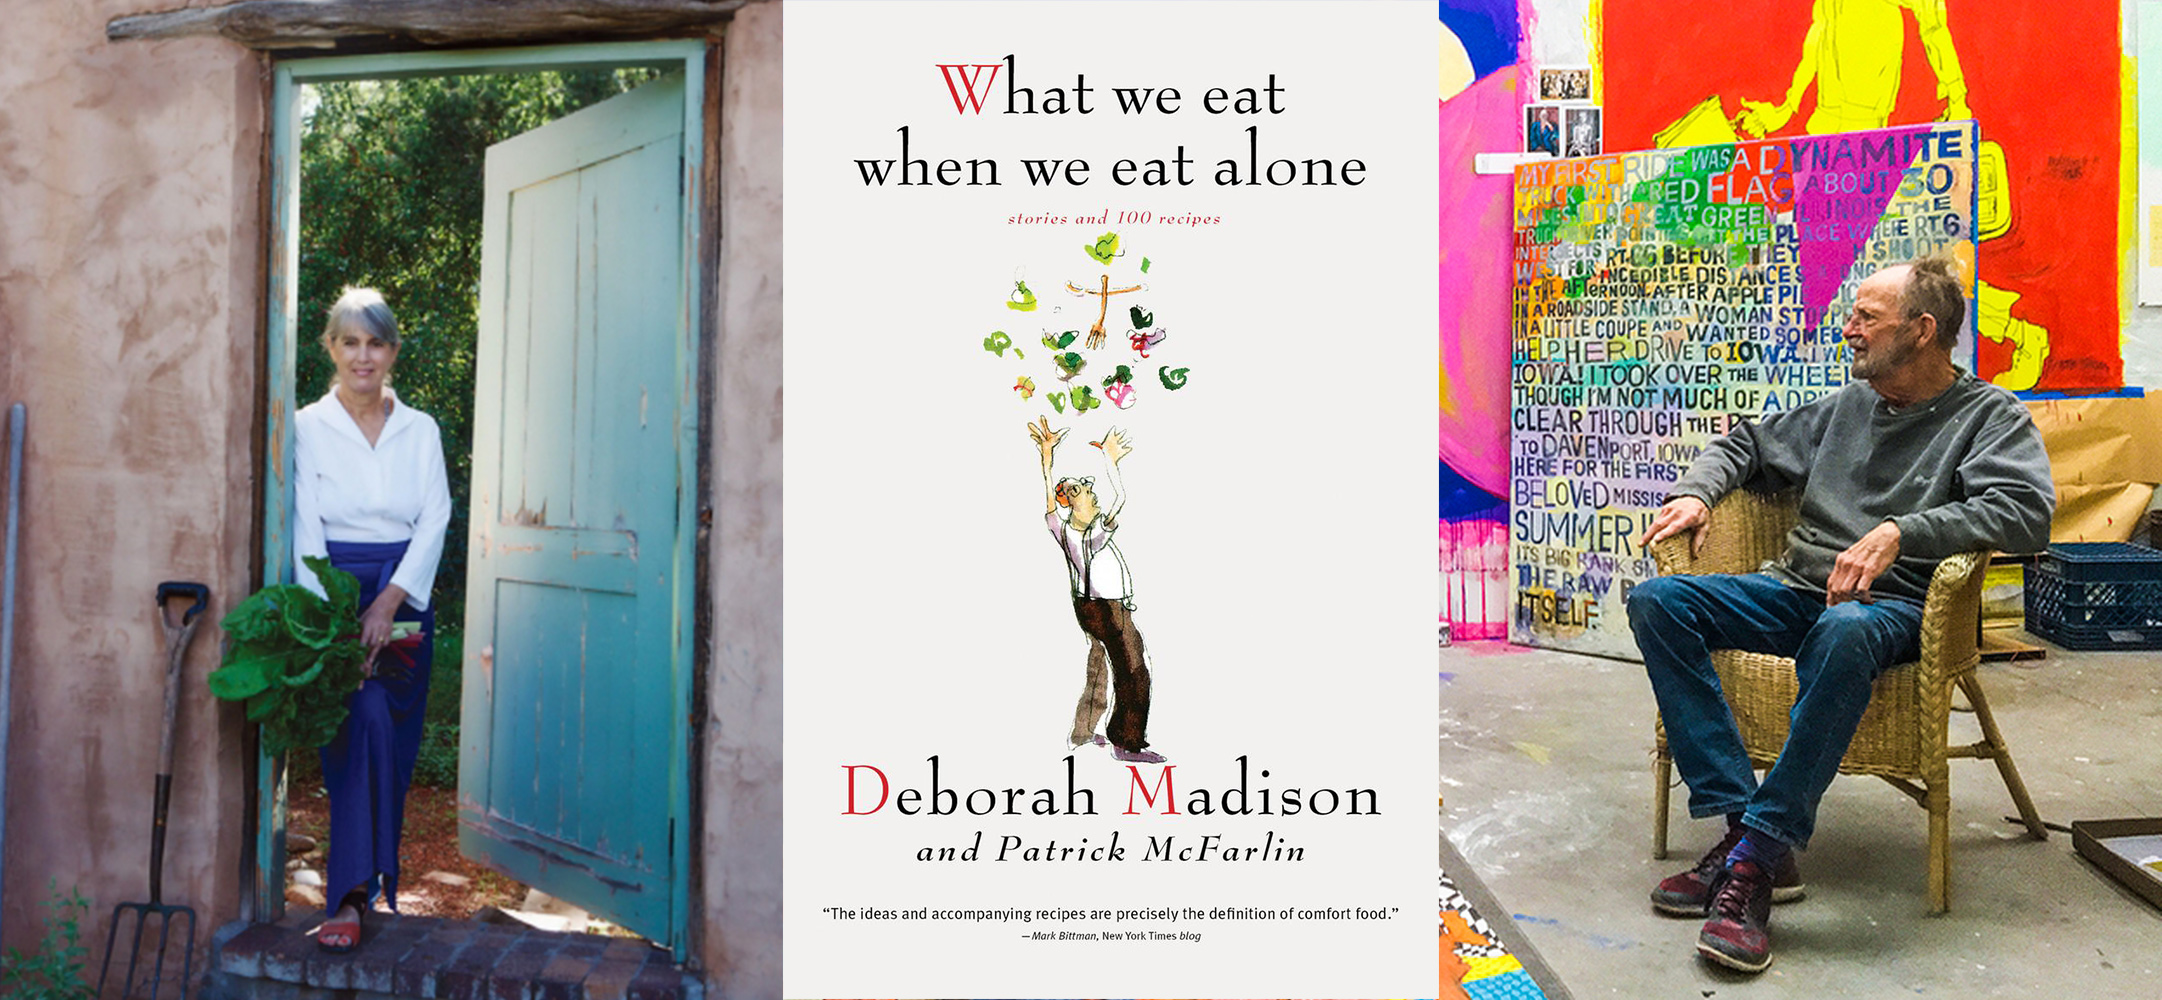 Slow Food Russian River Book Group discusses What we eat when we eat alone, by Deborah Madison and Patrick McFarlin